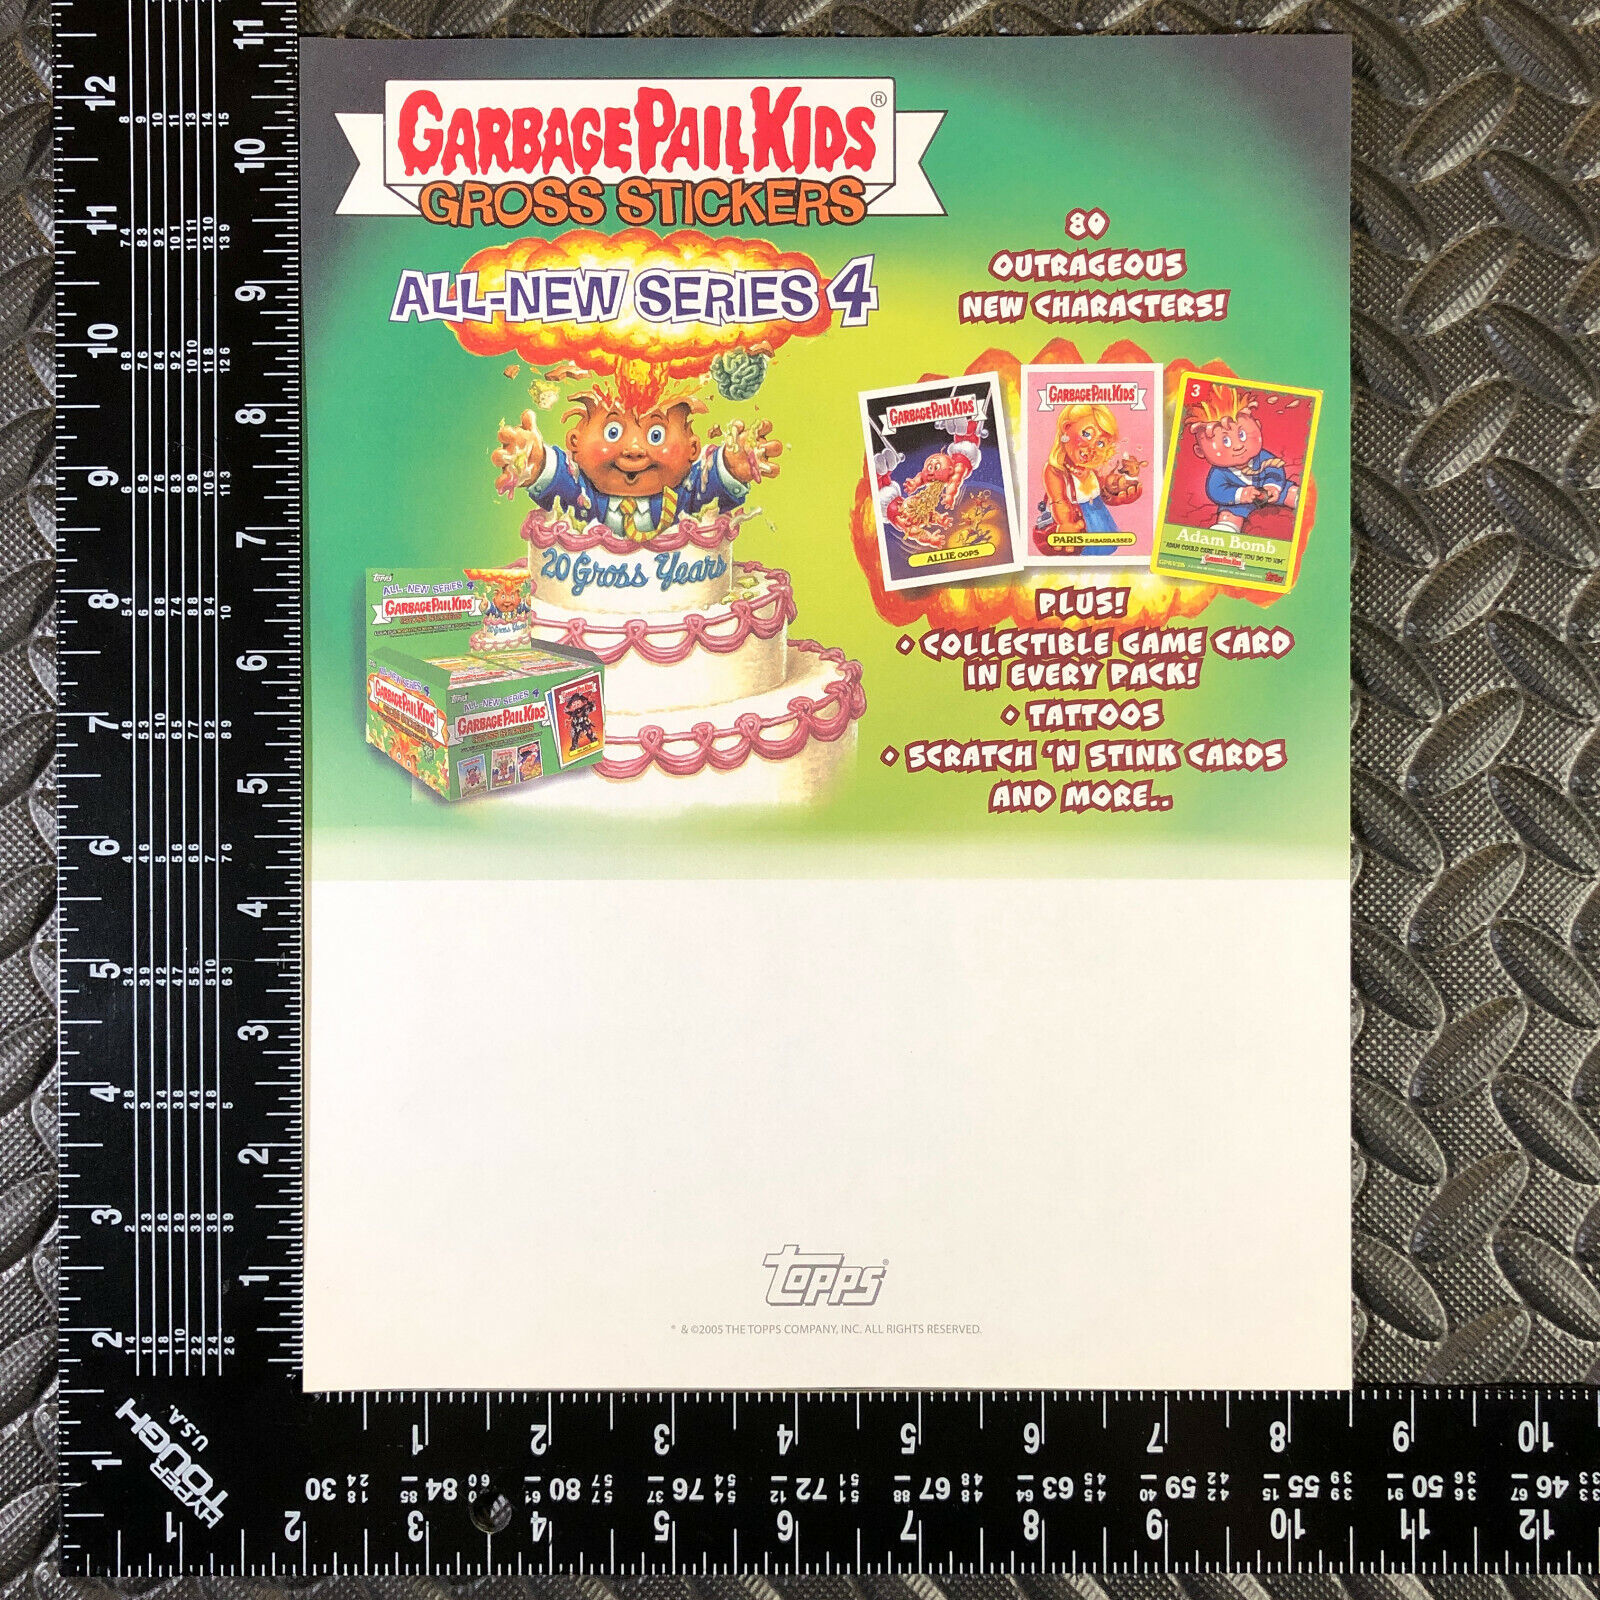 GARBAGE PAIL KIDS ANS4 2005 PROMO TAB SELL HALF SHEET FLYER ALL-NEW SERIES 4